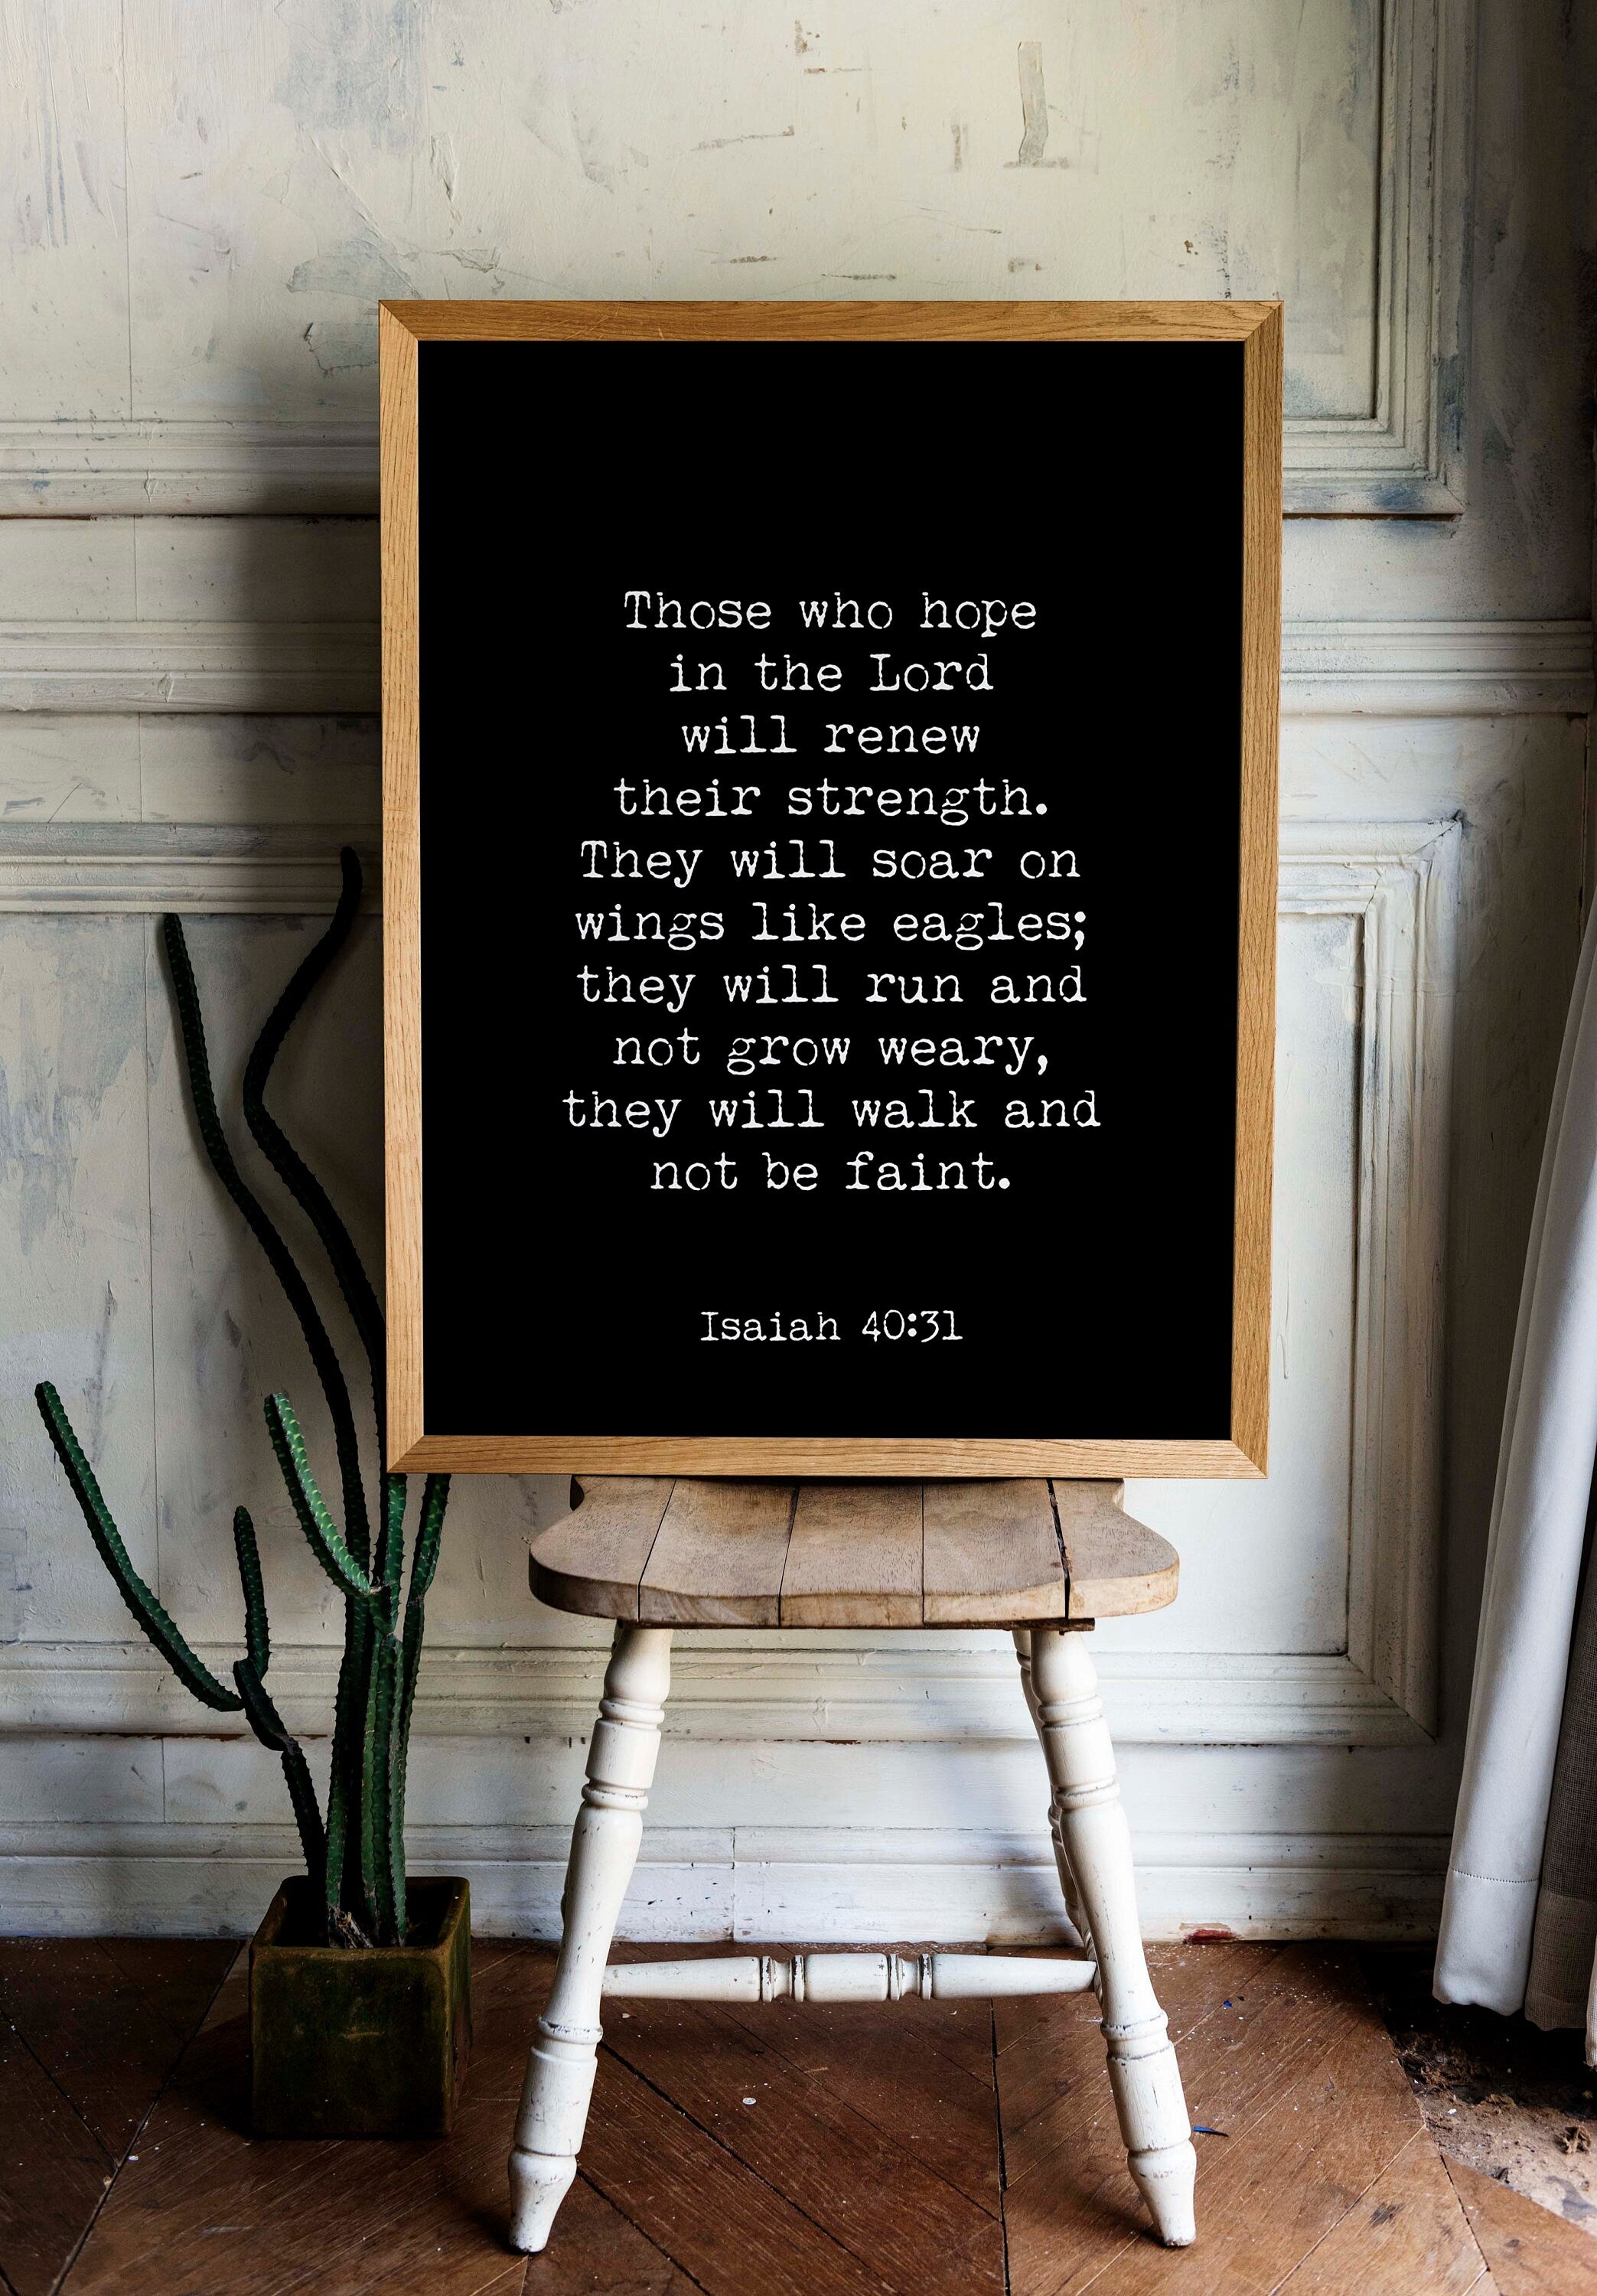 Isaiah 40:31 Hope in the LORD Bible Verse Print, Run And Not Grow Weary Inspirational Gift Wall Art in Black & White